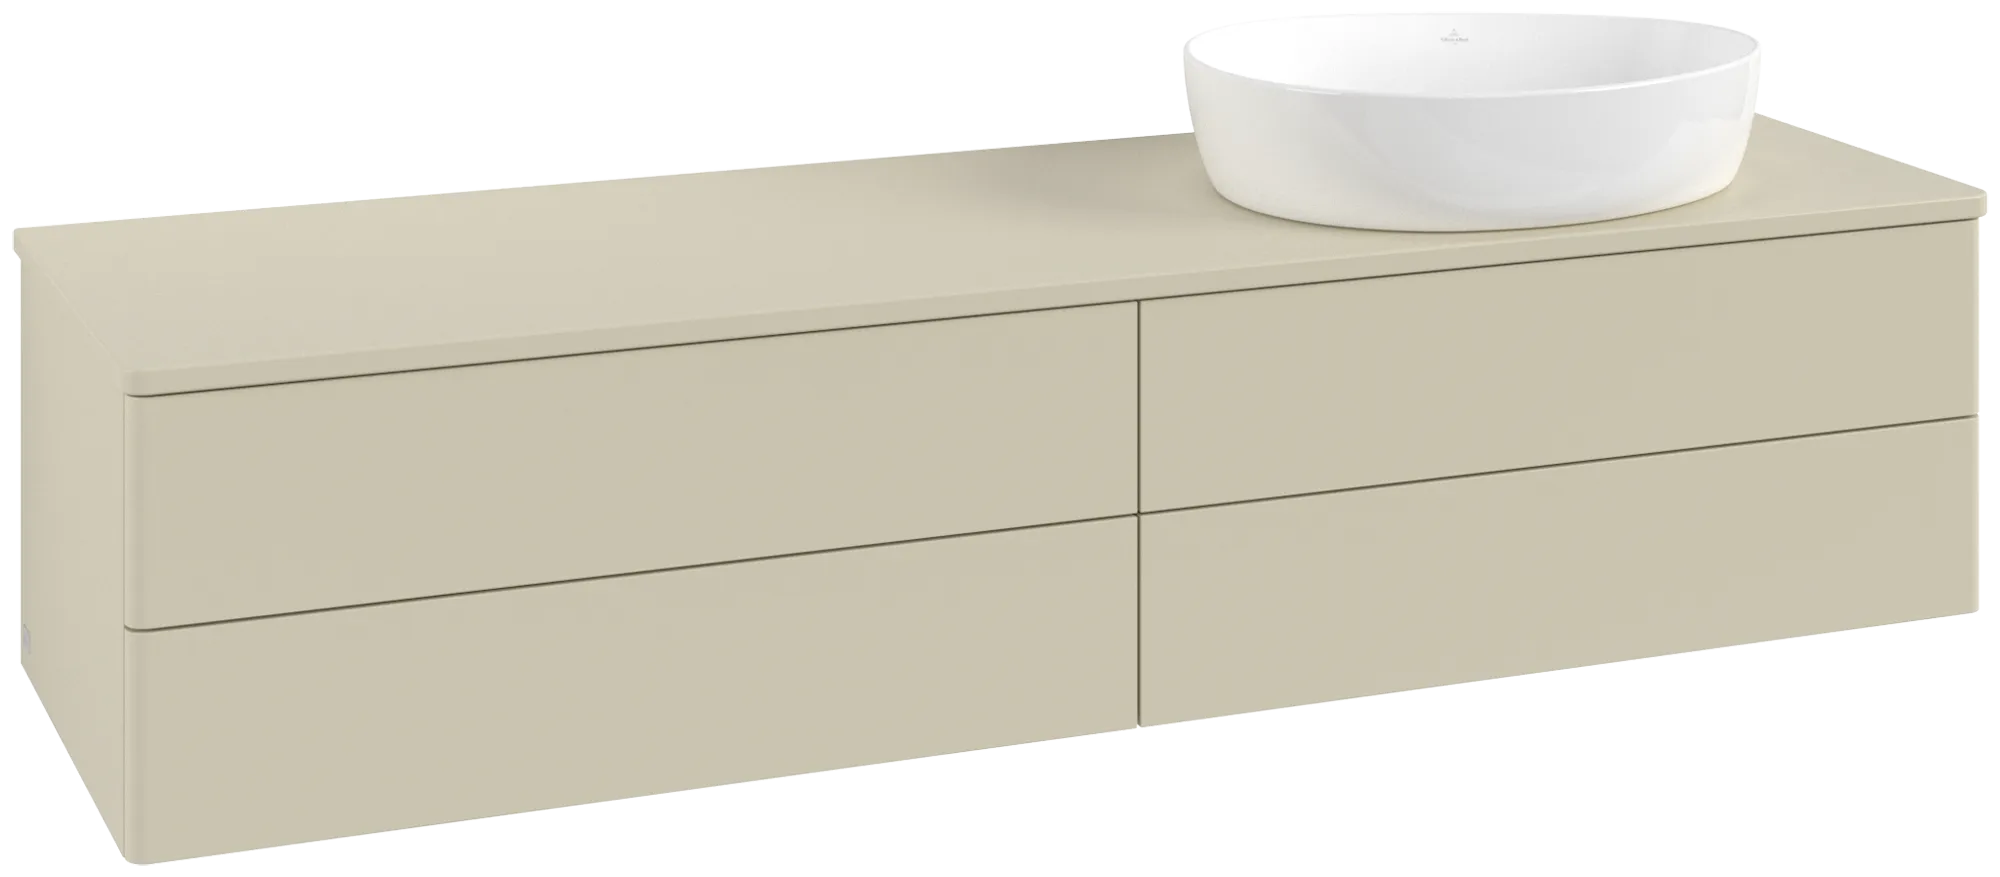 Picture of VILLEROY BOCH Antao Vanity unit, with lighting, 4 pull-out compartments, 1600 x 360 x 500 mm, Front without structure, Silk Grey Matt Lacquer / Silk Grey Matt Lacquer #L27050HJ